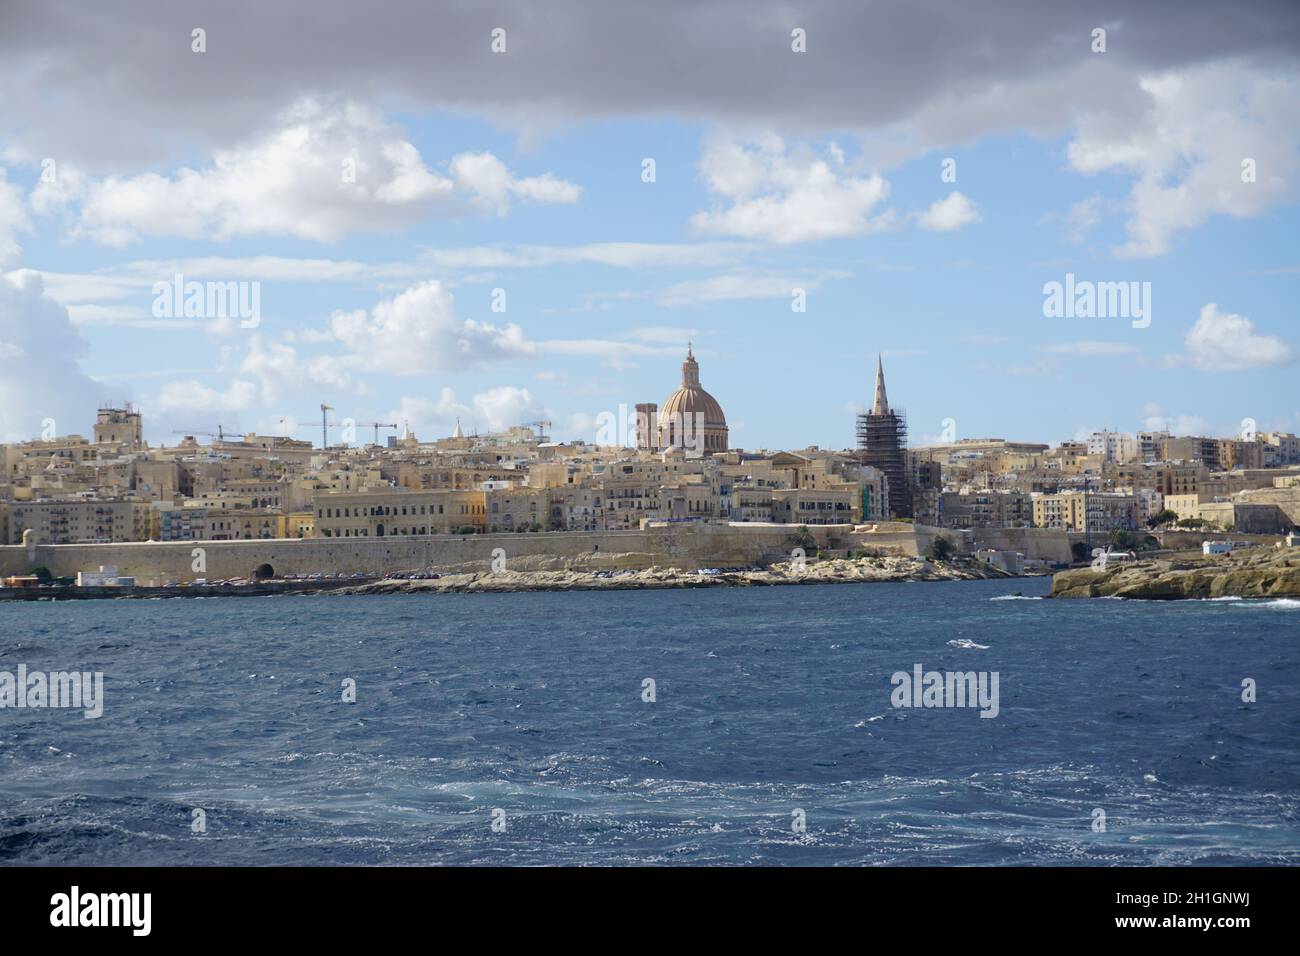 water view of the Capital city Valletta on the island of Malta. Photo by Willy Matheisl Stock Photo